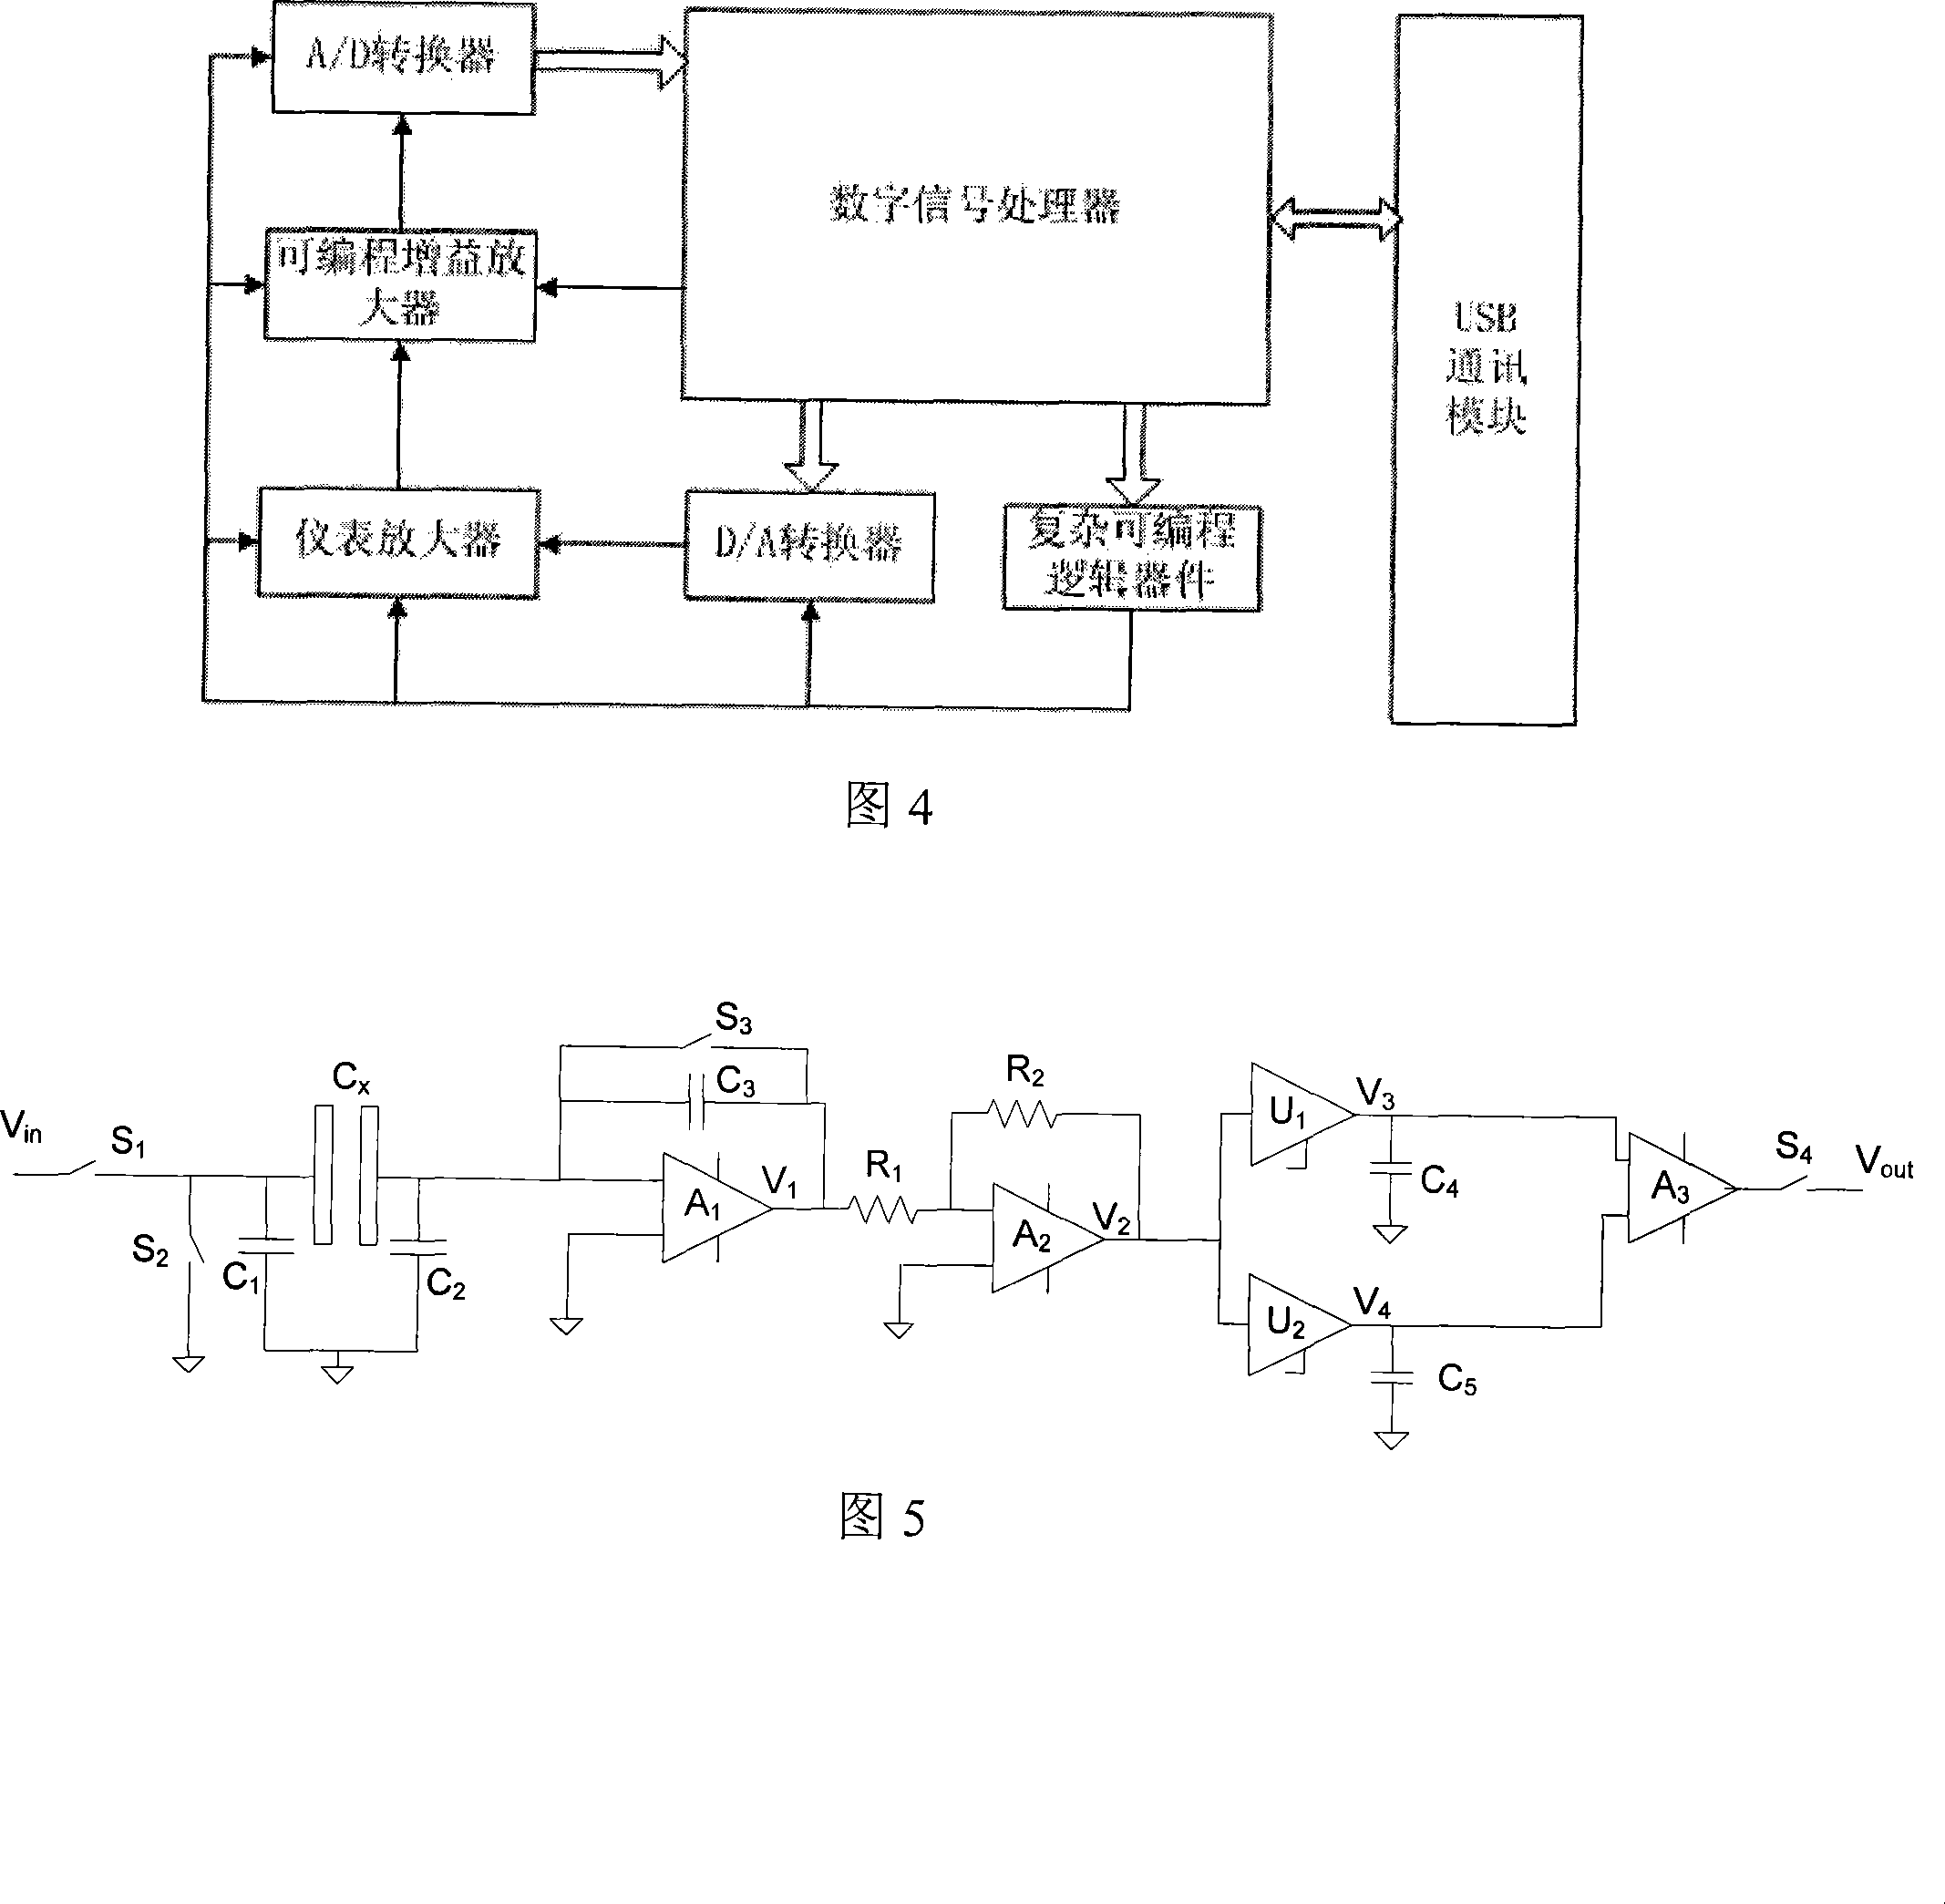 Apparatus and method for measuring microtubule gas-liquid diphasic flow rate